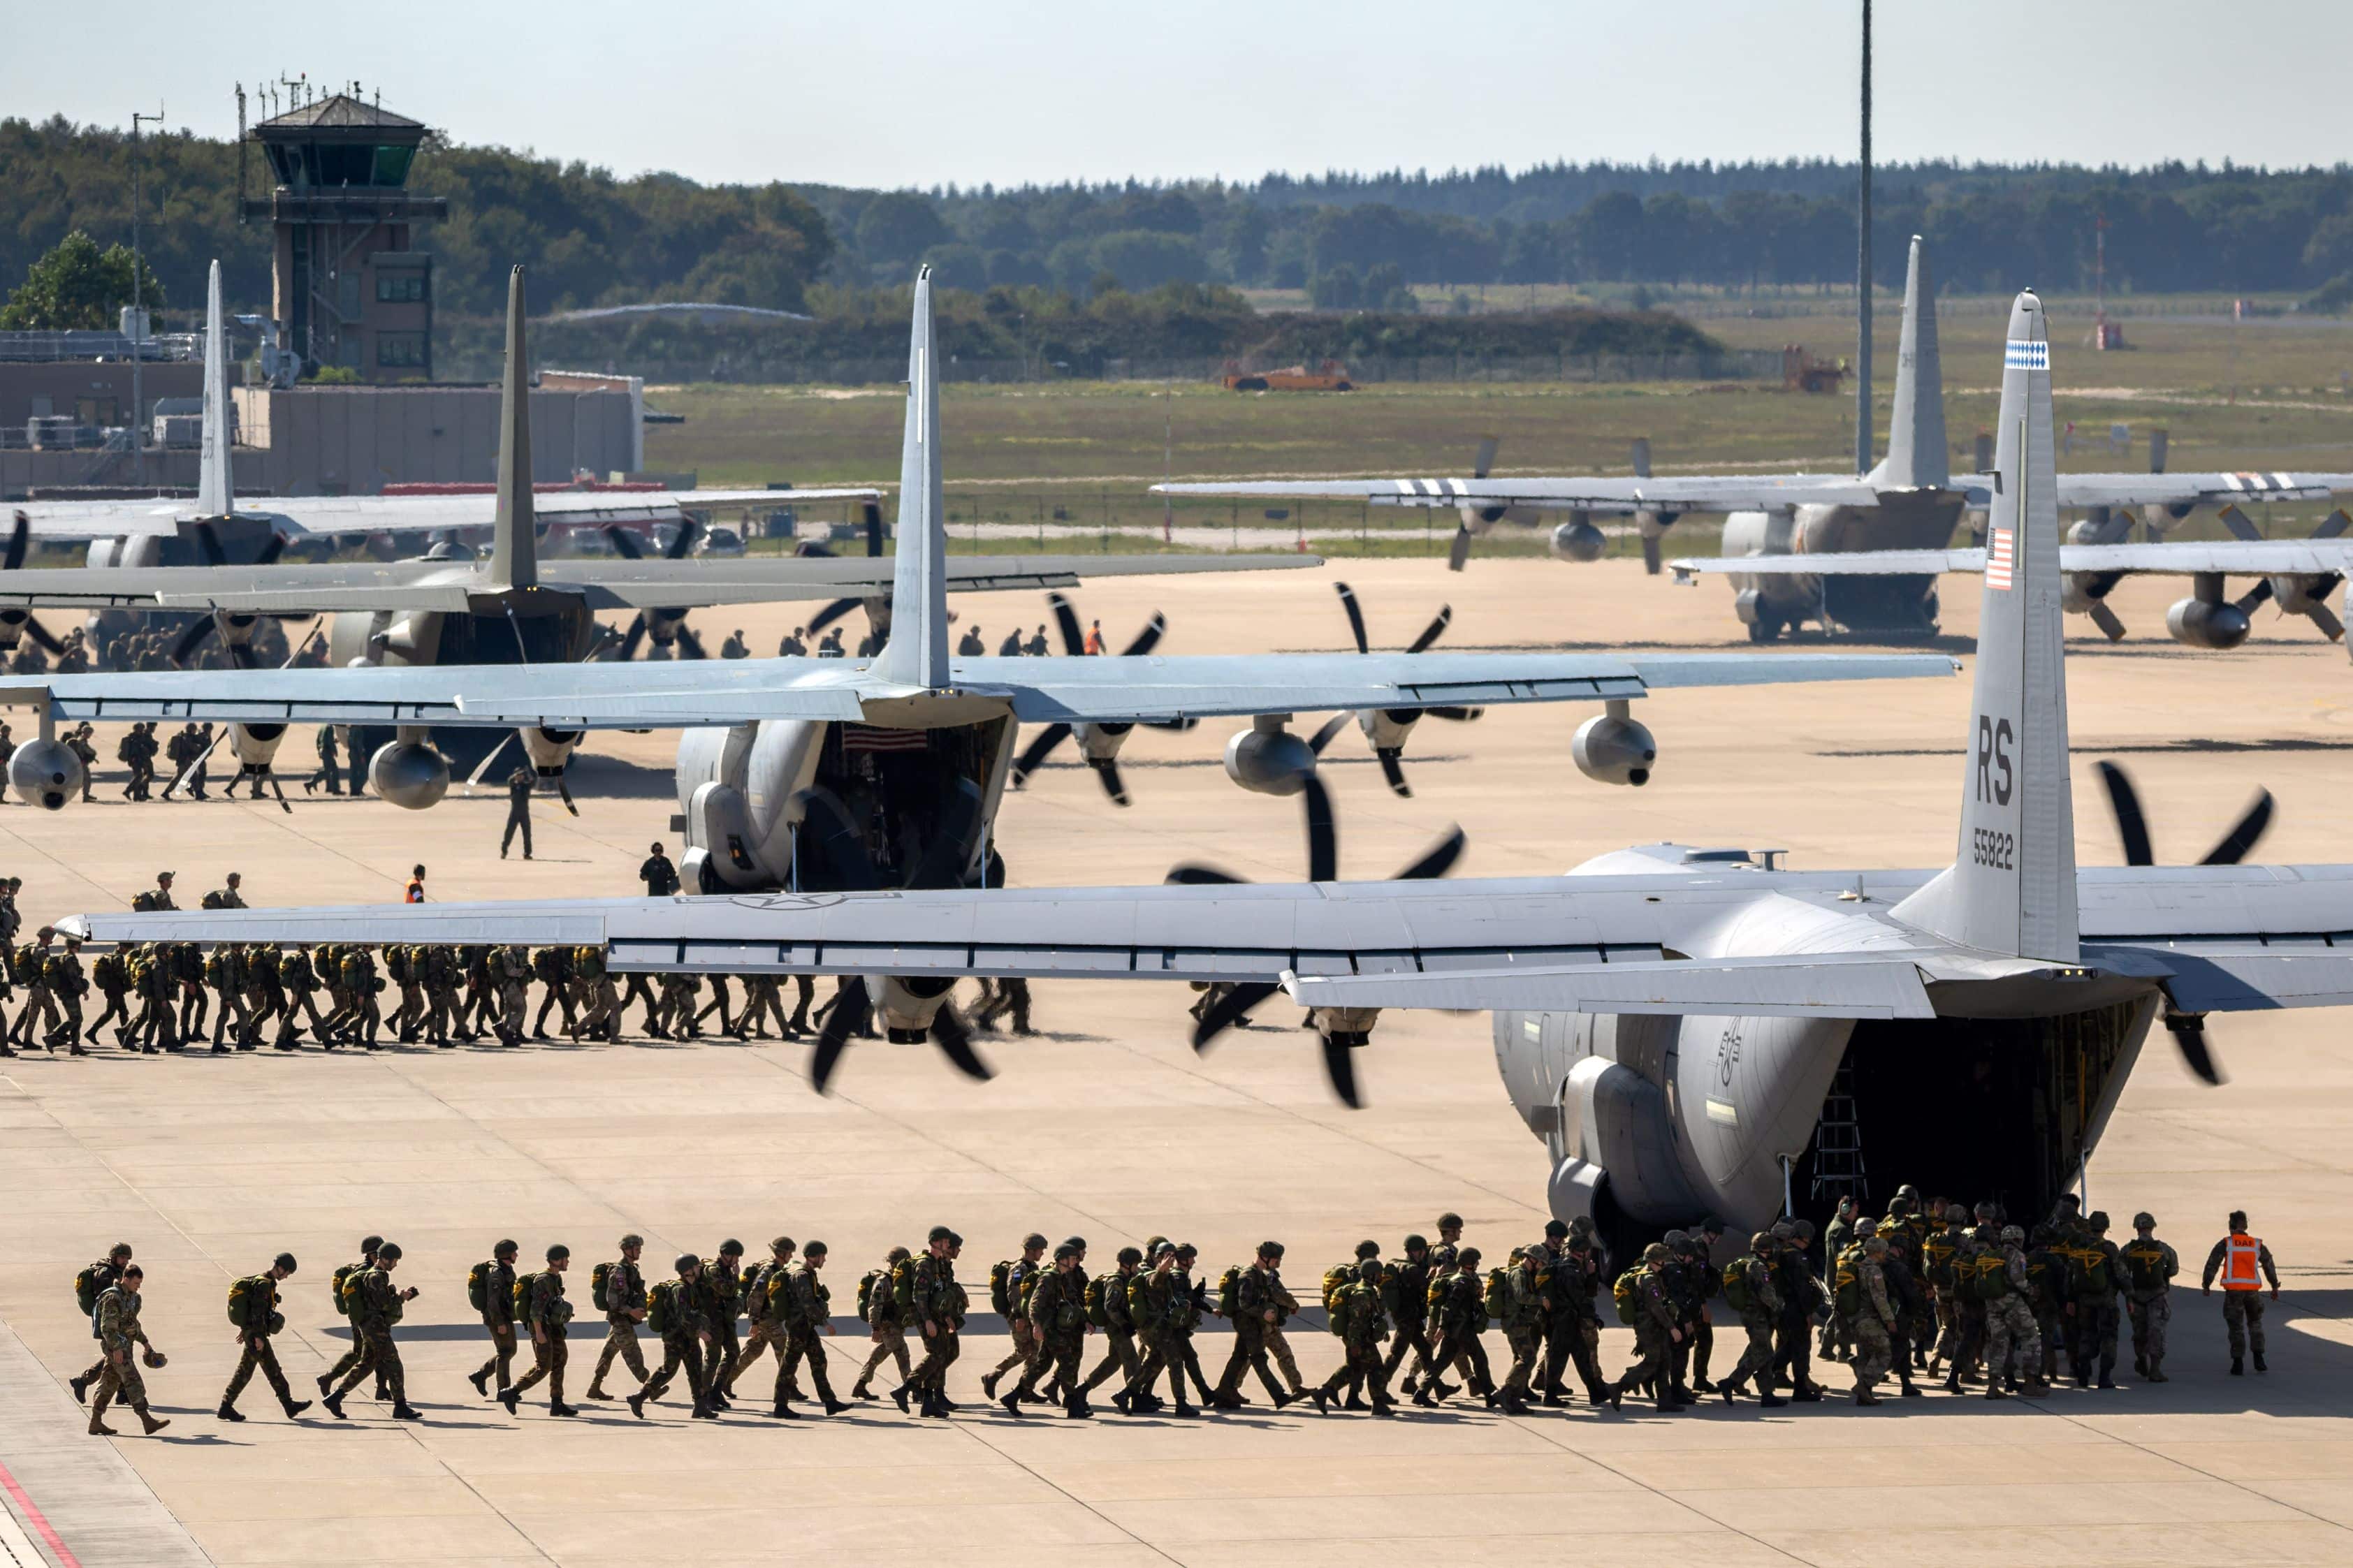 EINDHOVEN, NETHERLANDS - SEP 20, 2019: Paratroopers entering a US Air Force C-130 Hercules transport plane on Eindhoven airbase.